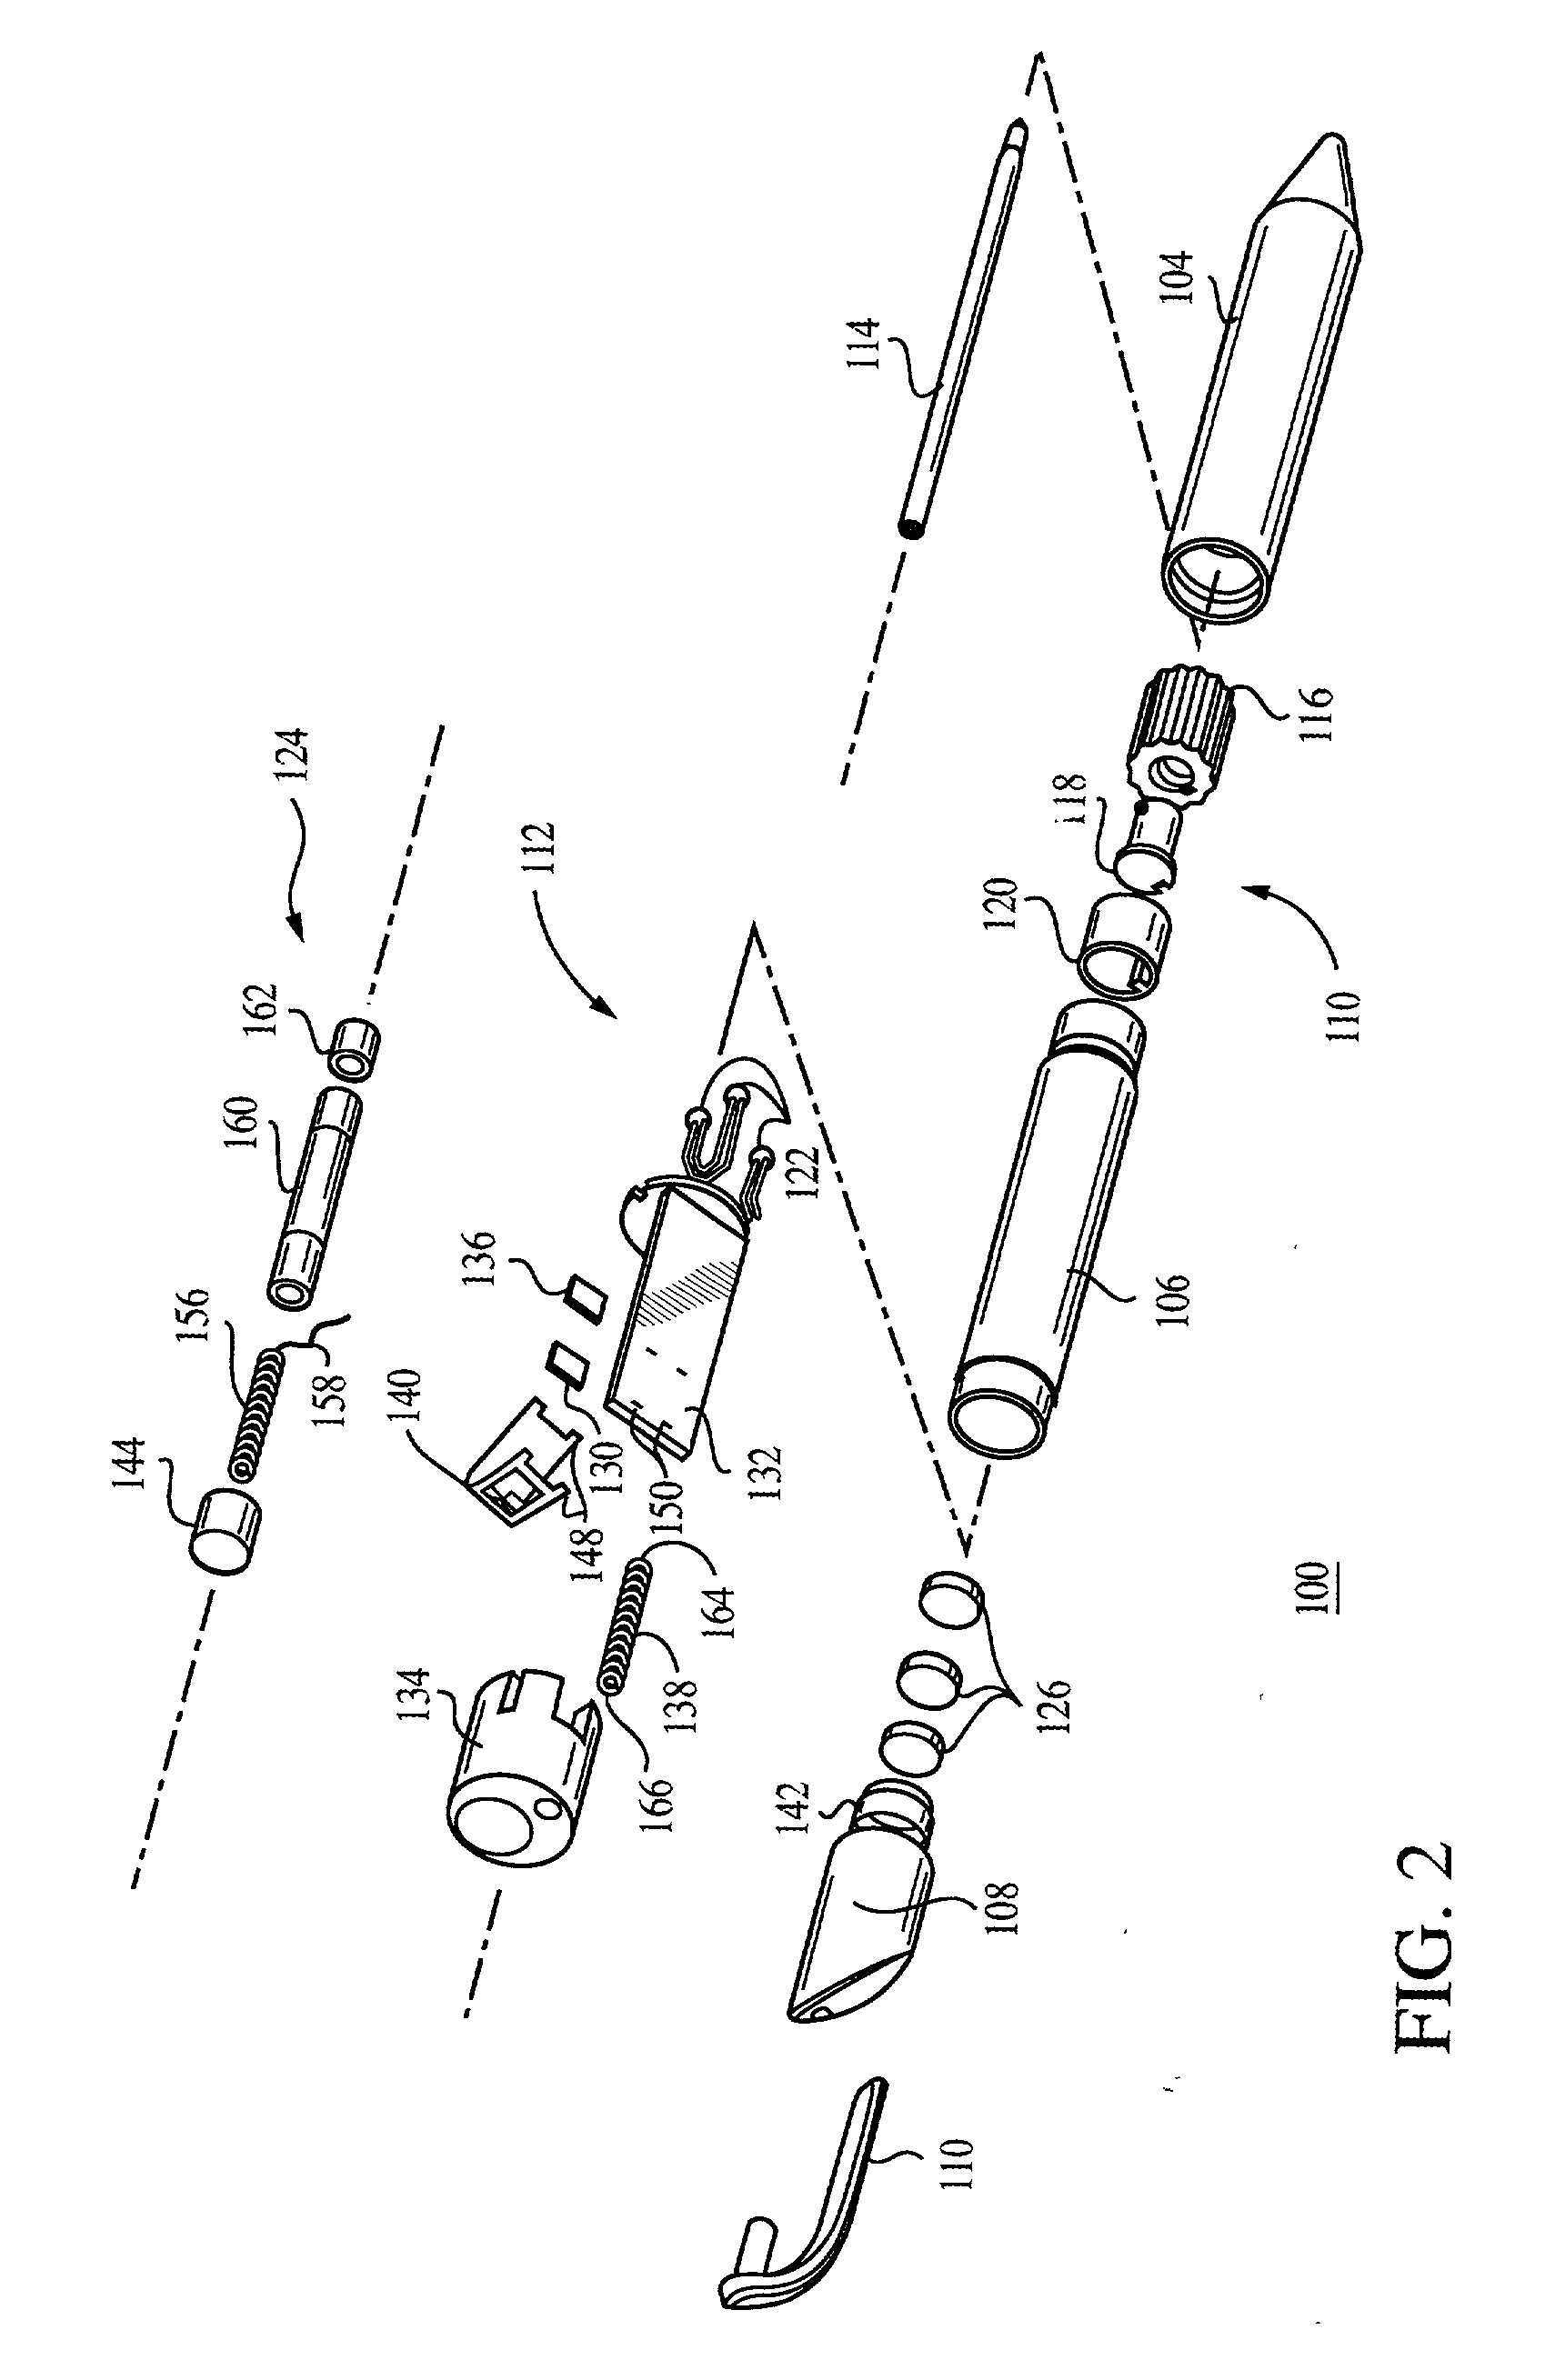 Novelty devices with flashing light feature